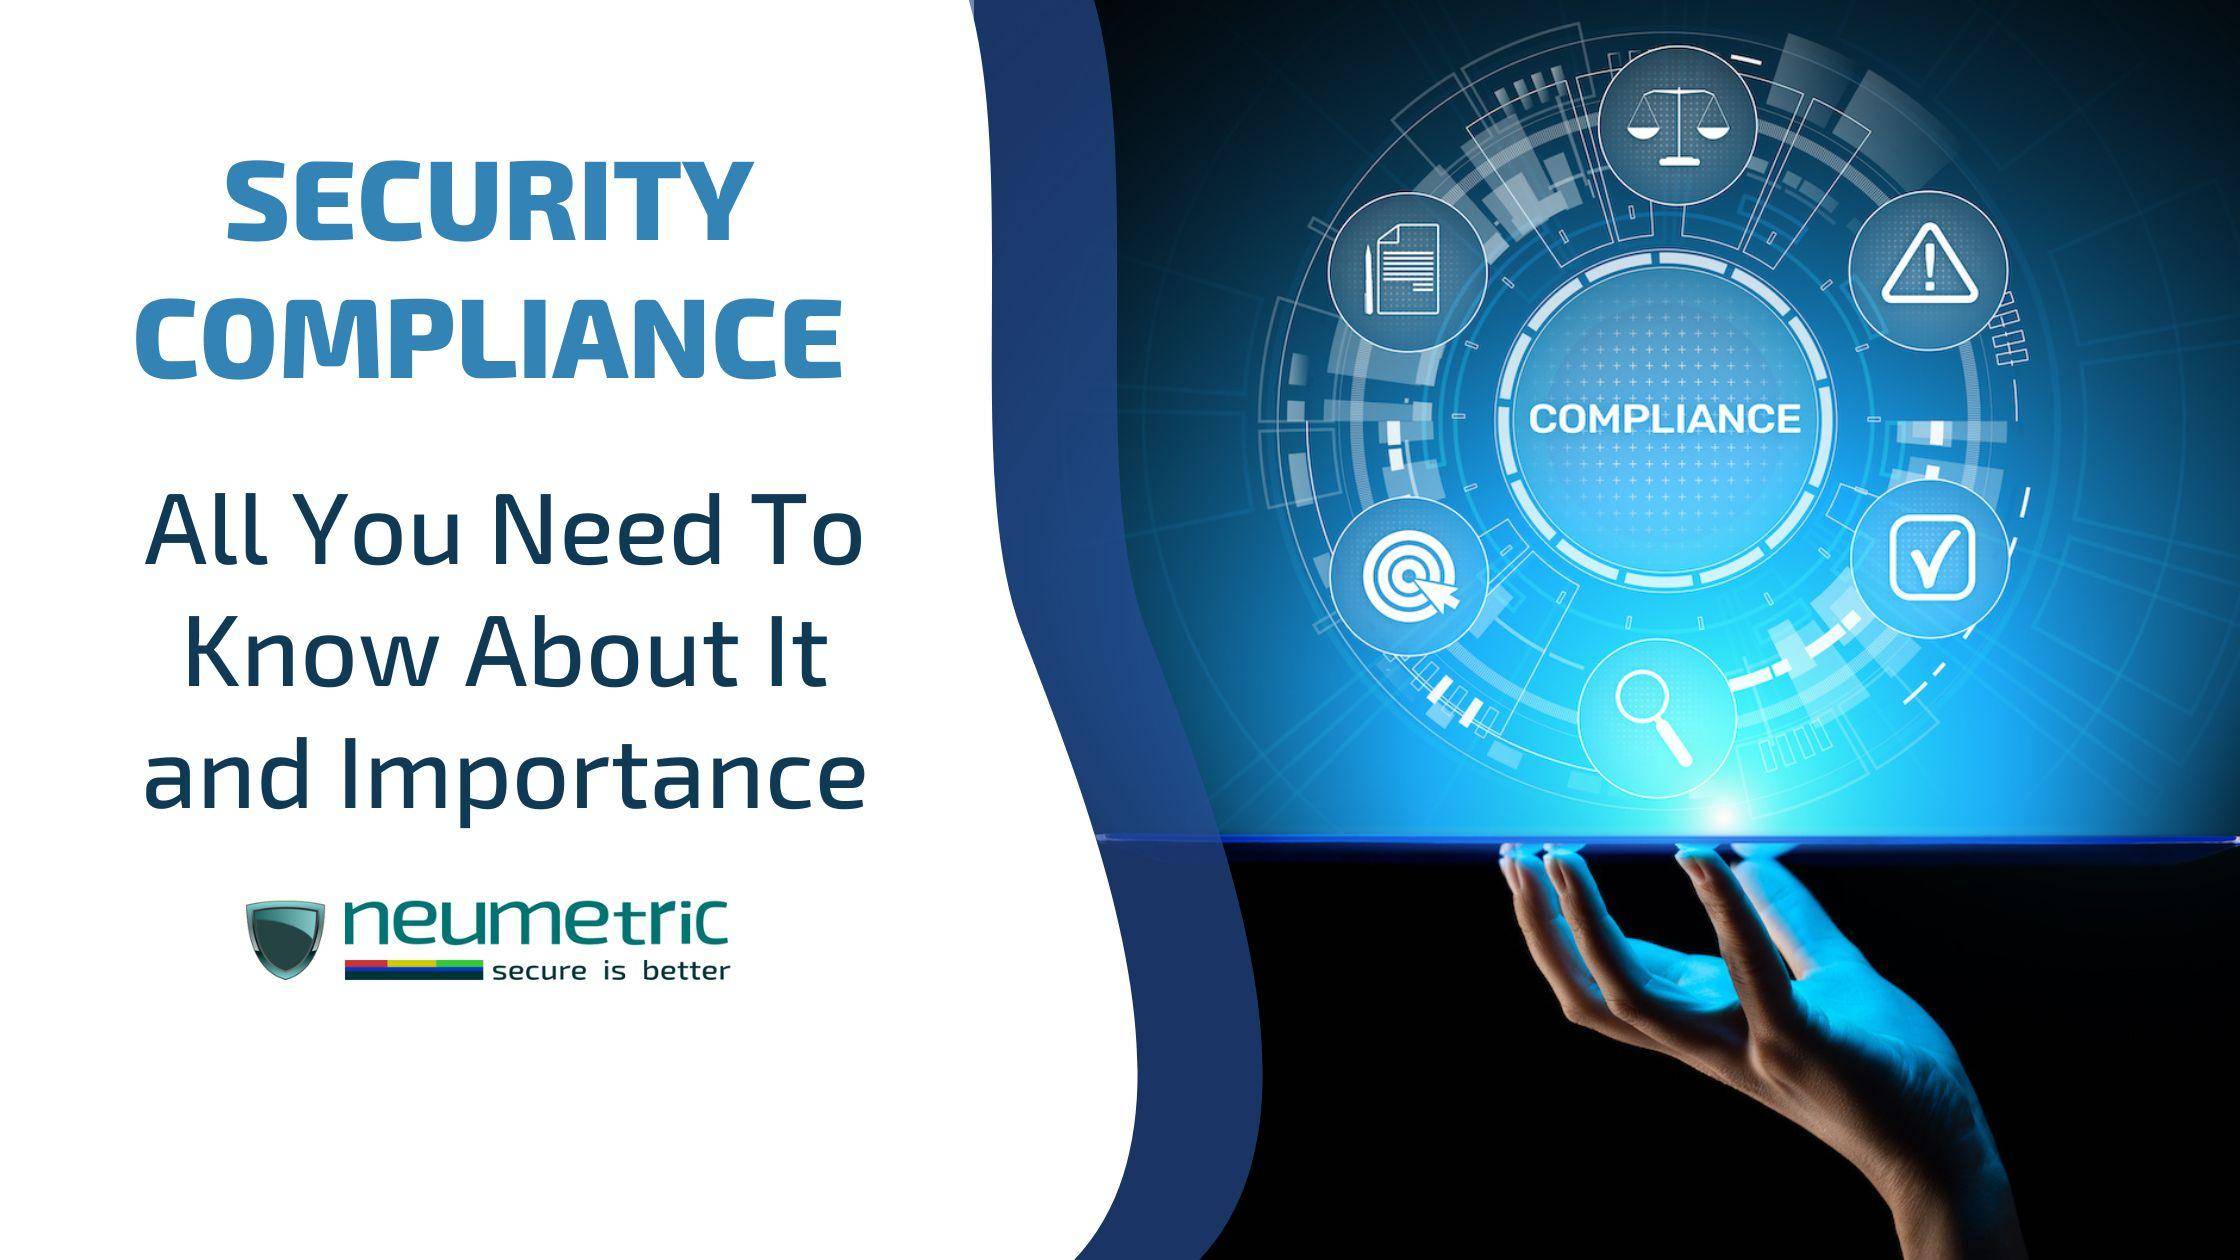 Security Compliance: All You Need To Know About It and Importance